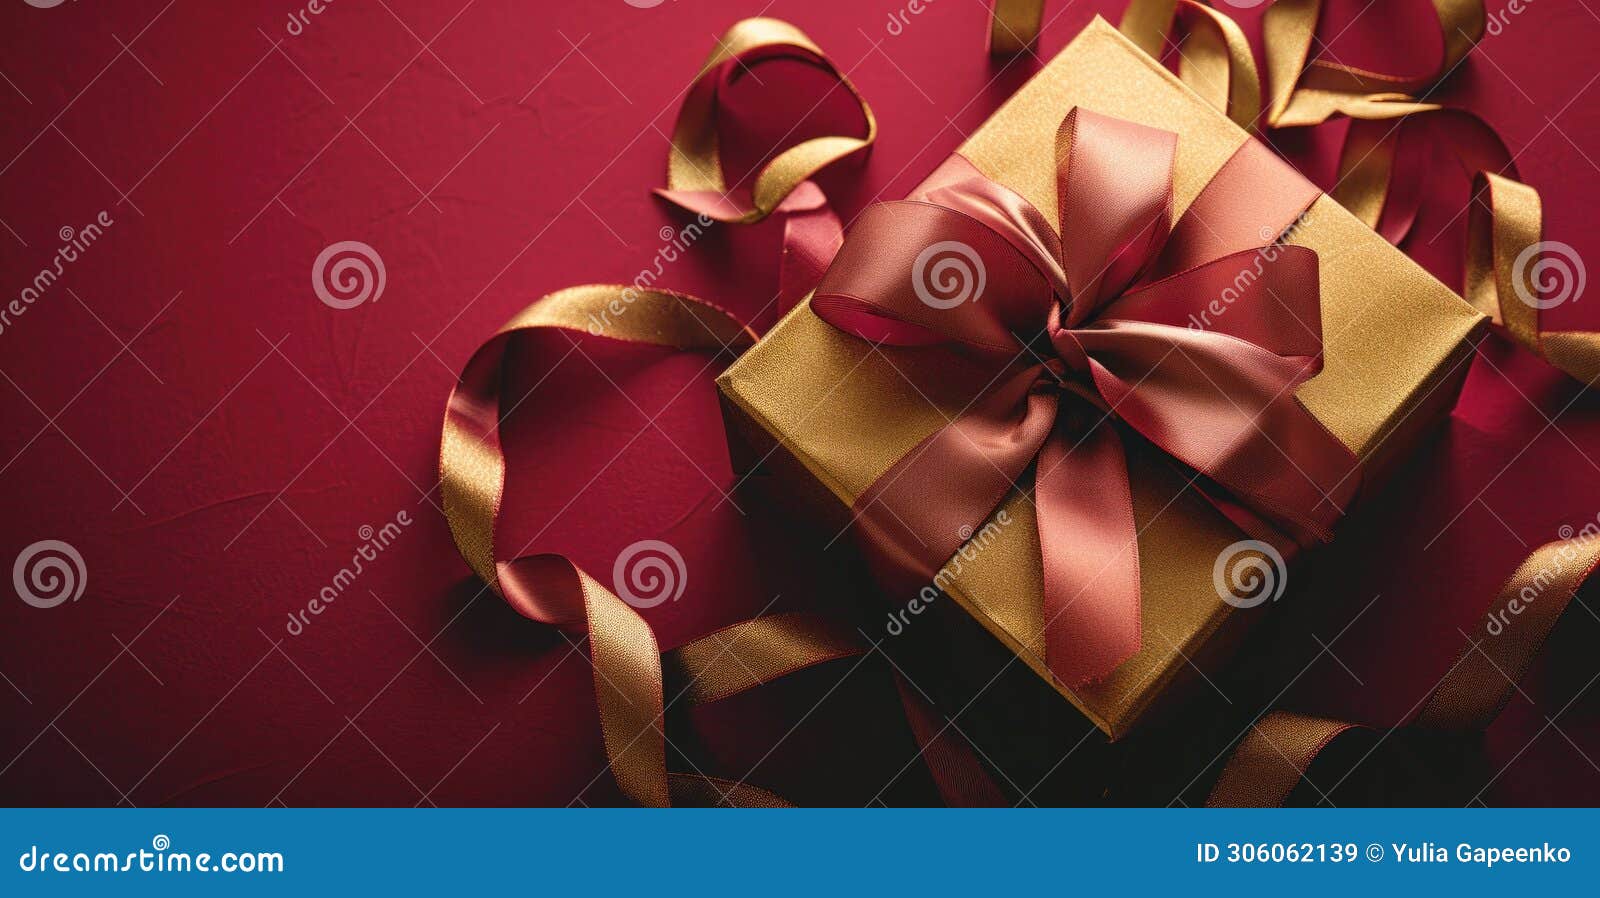 gold gift box, ribbon on rudo red background